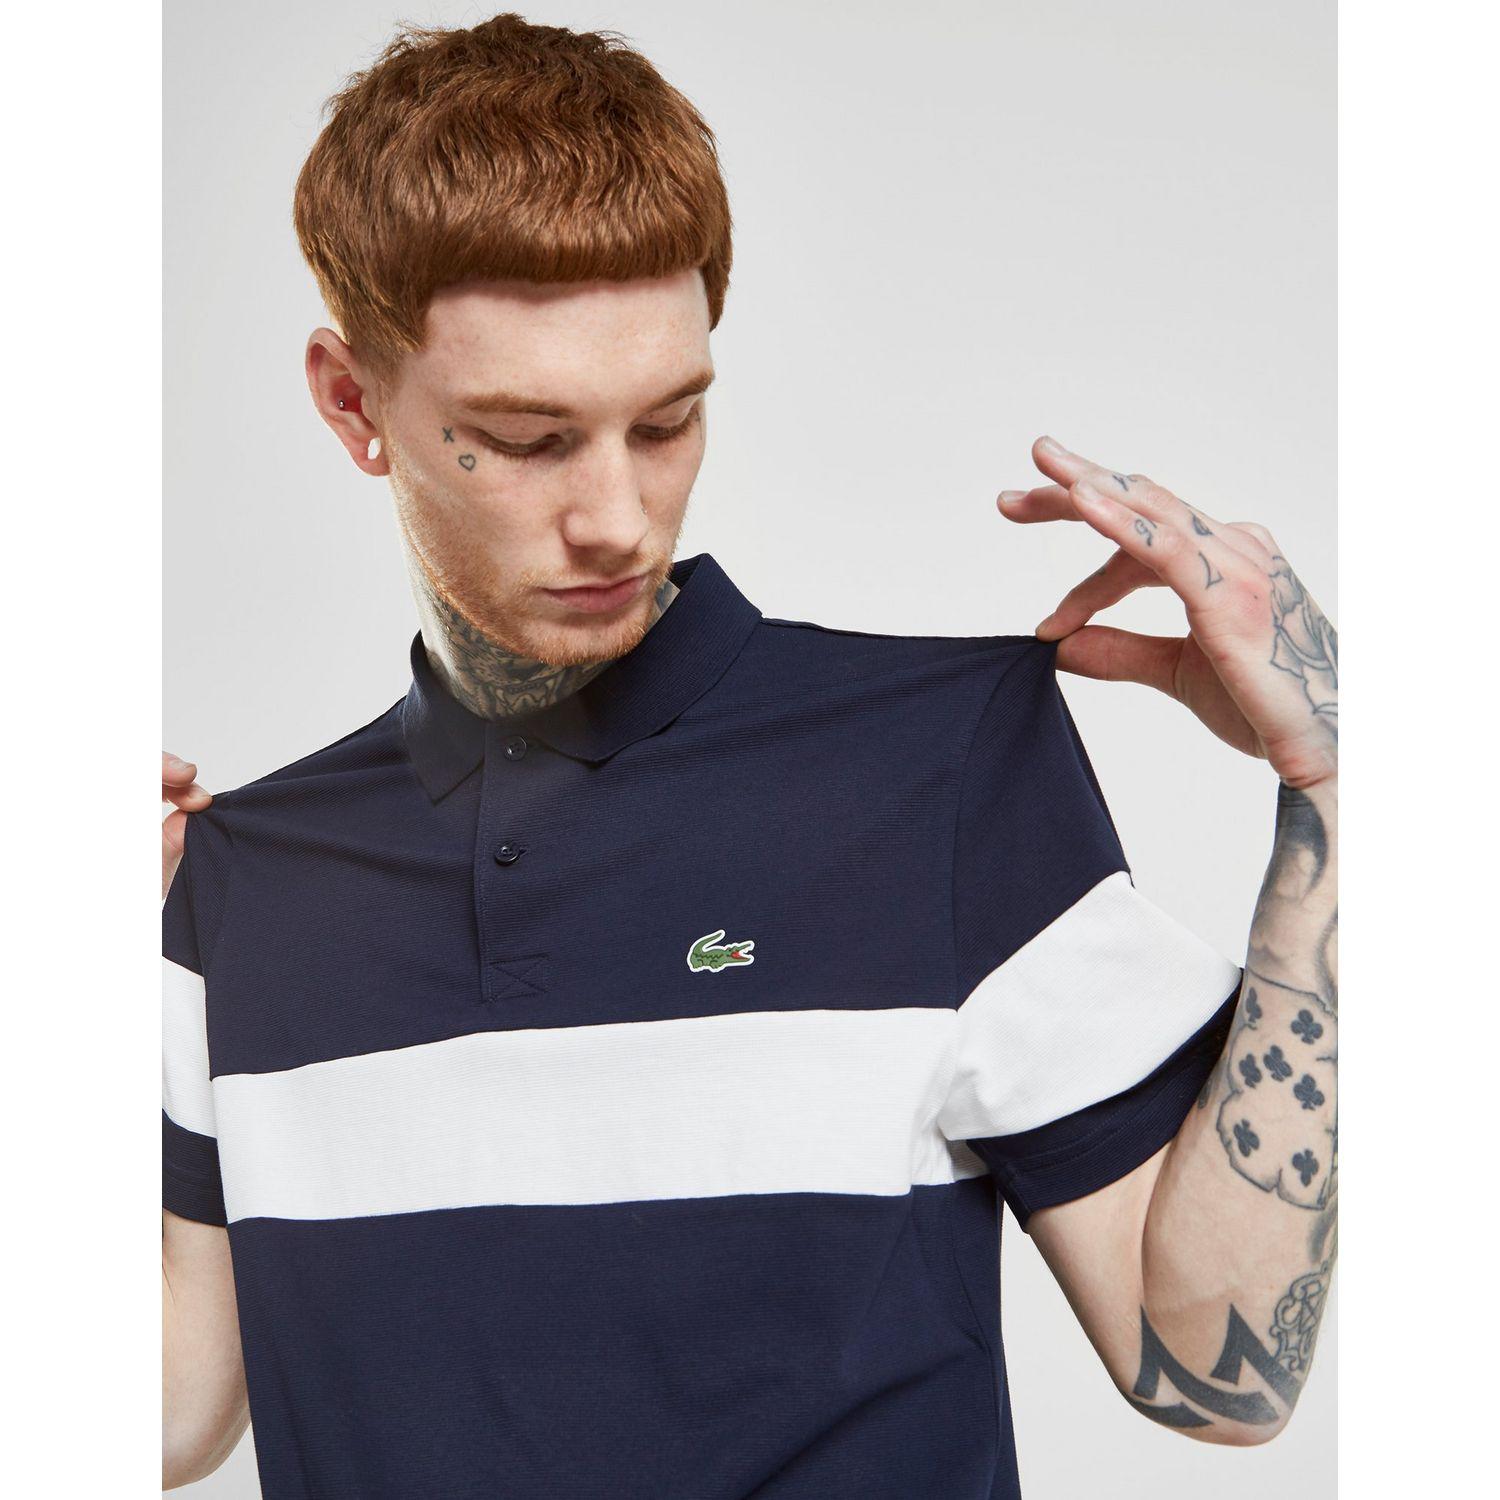 Buy jd lacoste t shirt> OFF-54%